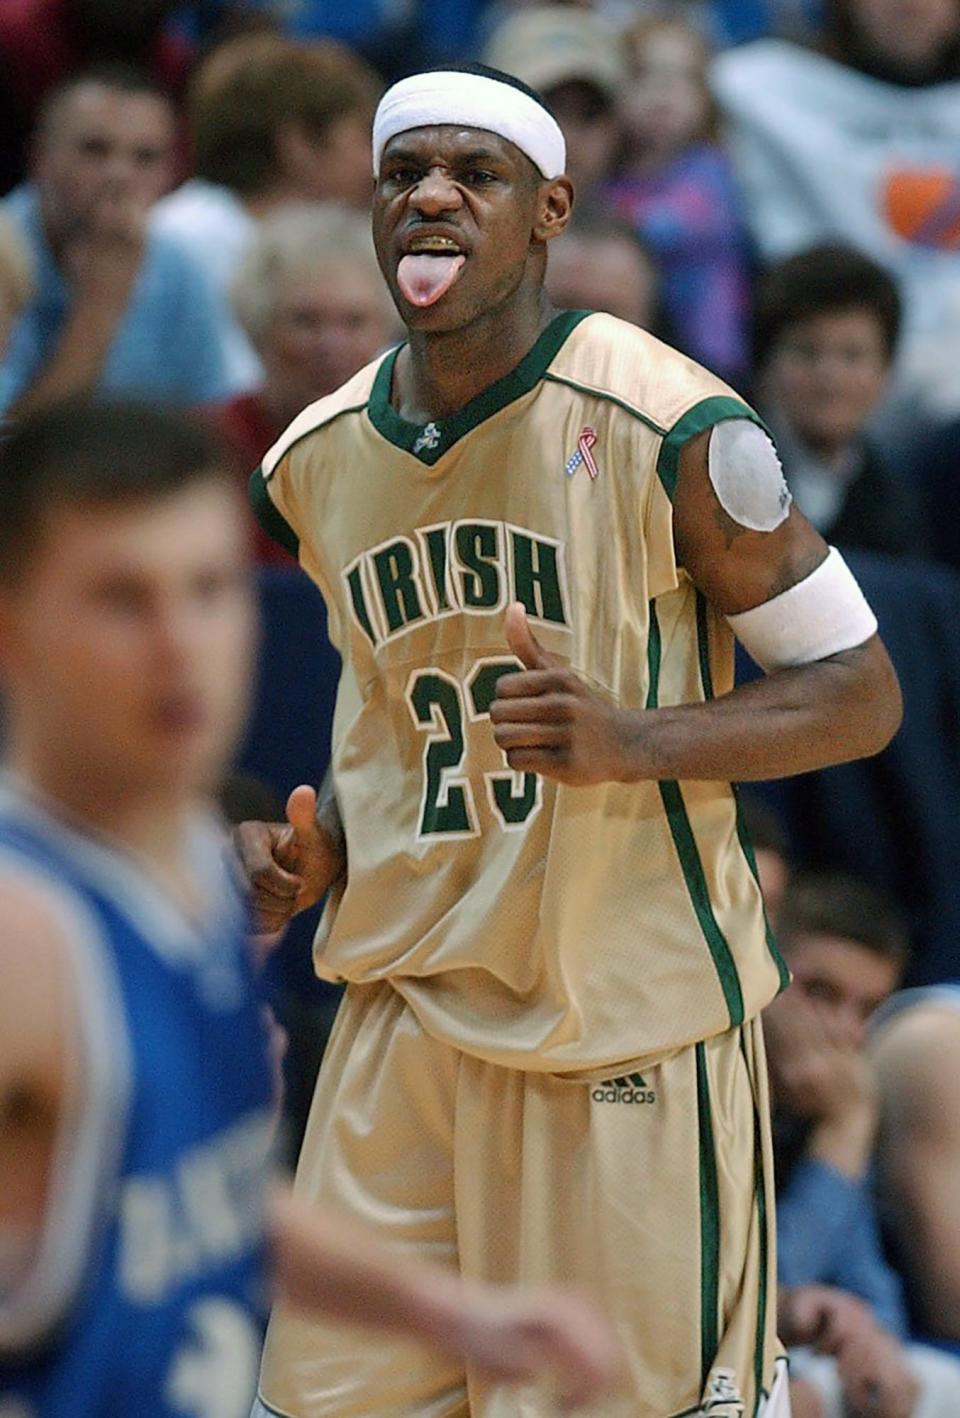 LeBron James scored 46 points in St. Vincent-St. Mary's 84-61 victory over Zanesville on Feb. 14, 2003.